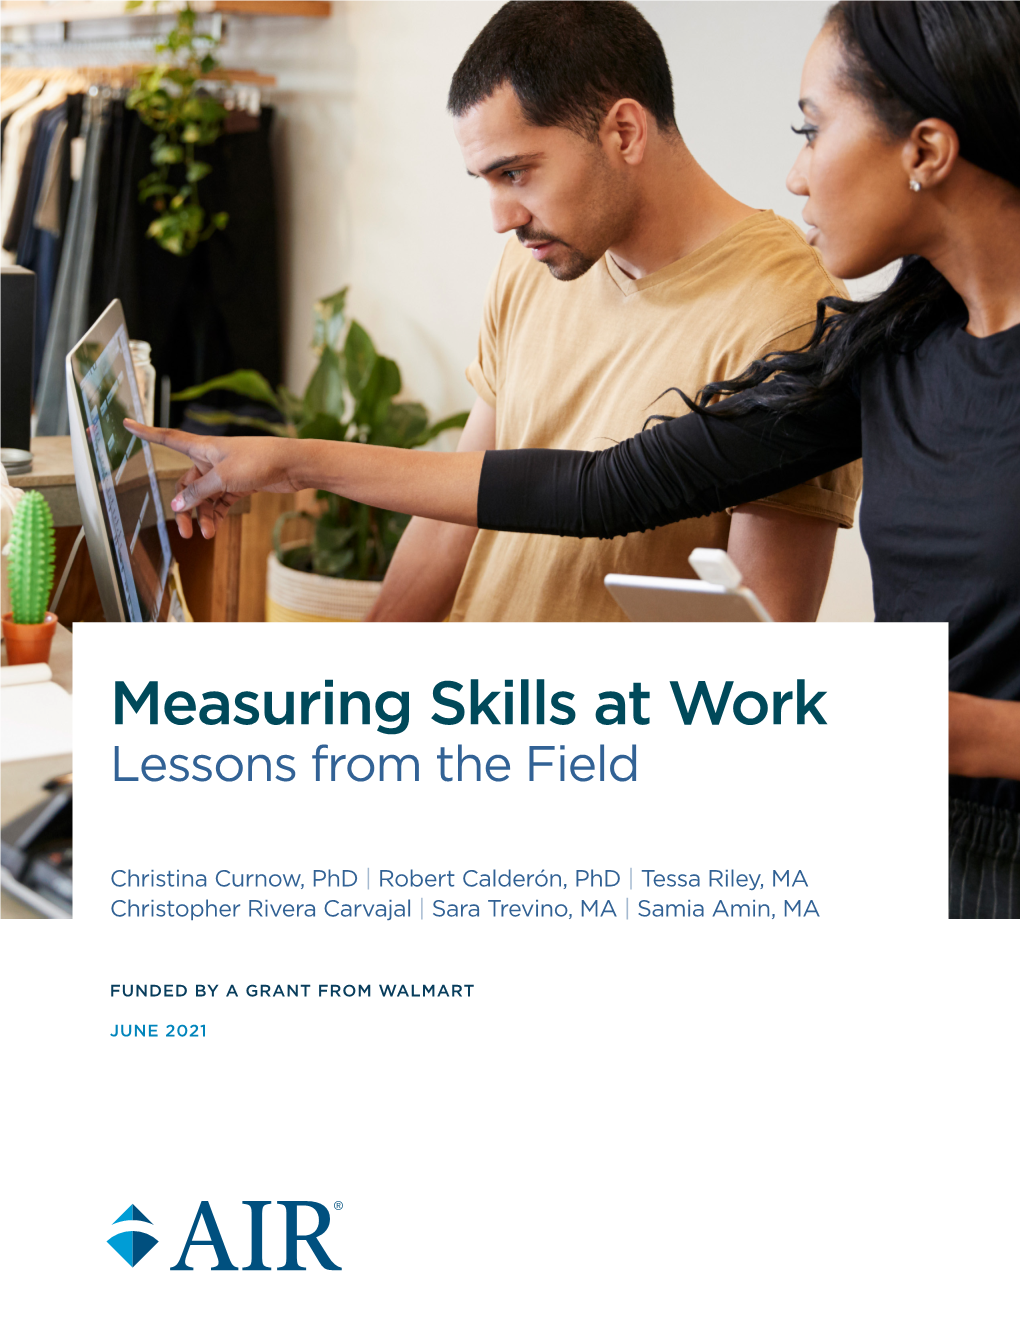 Measuring Skills at Work Lessons from the Field